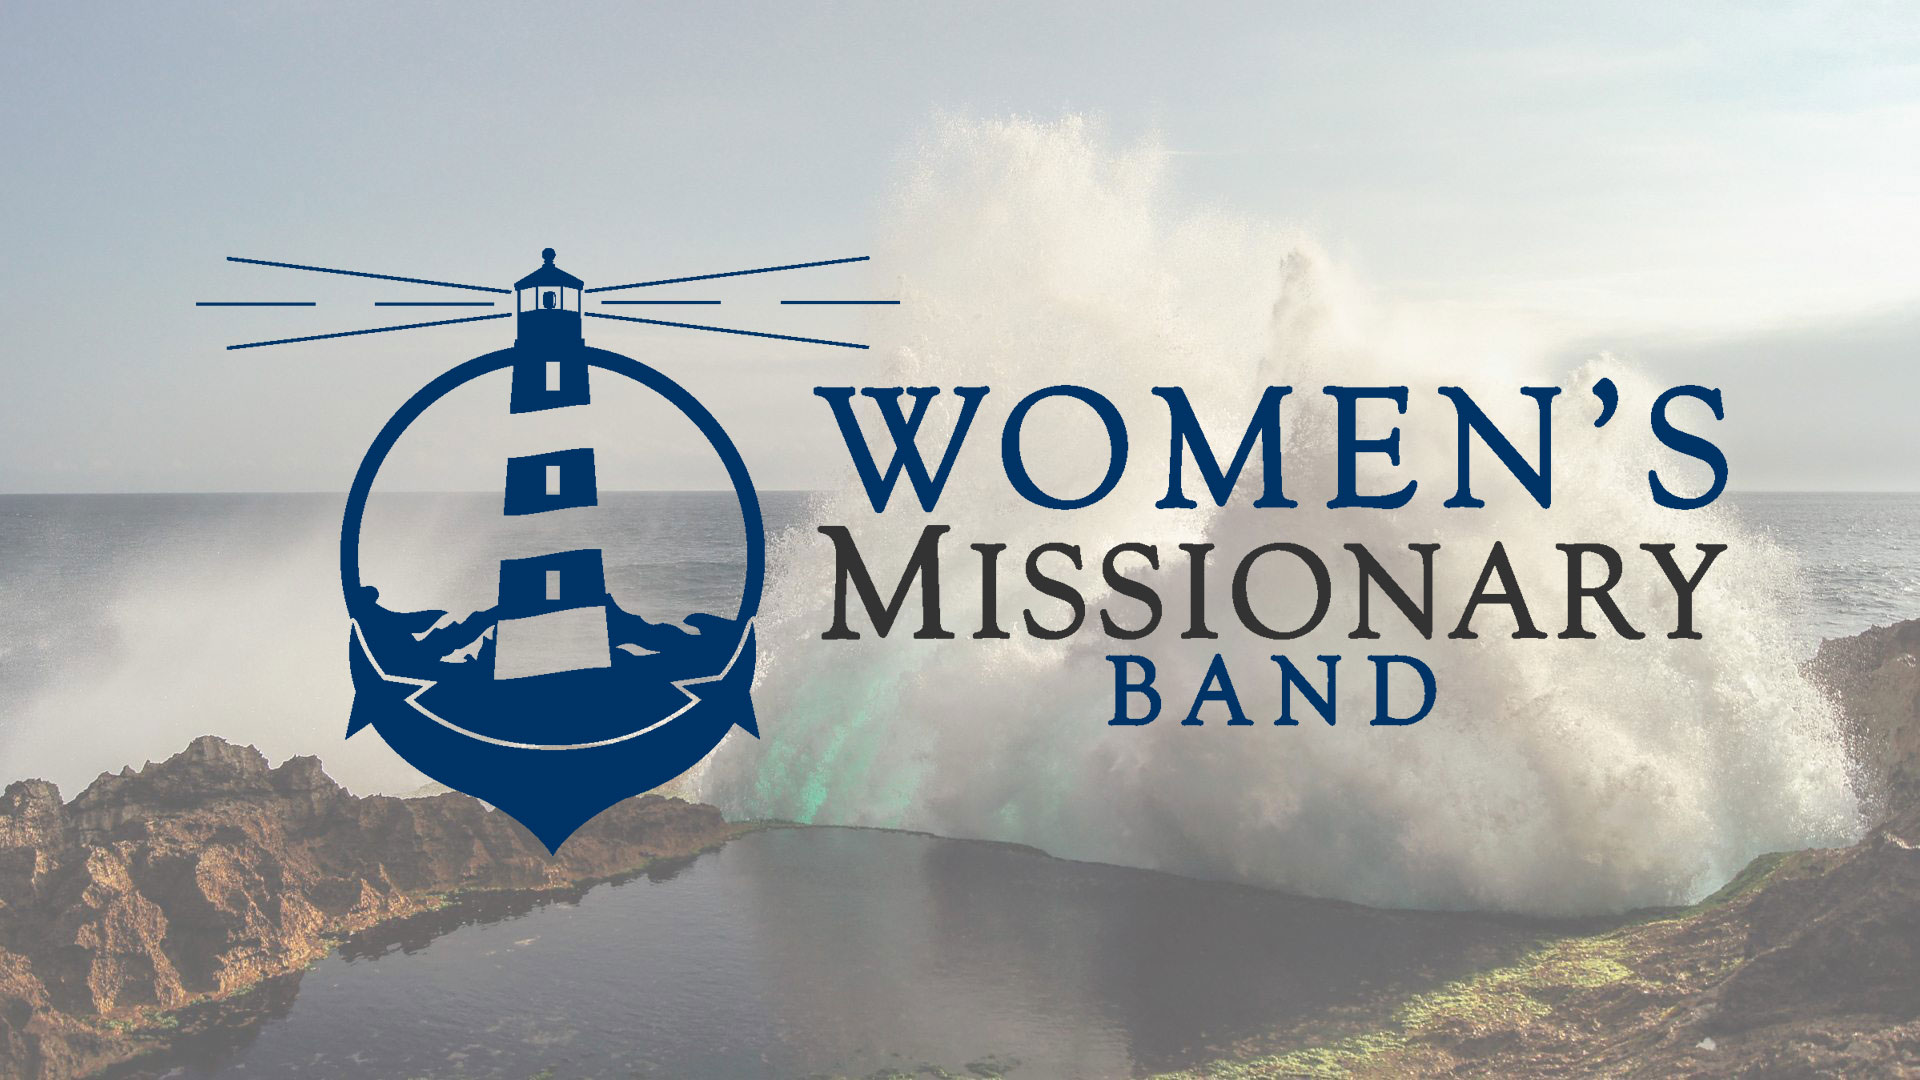 Women's Missionary Band